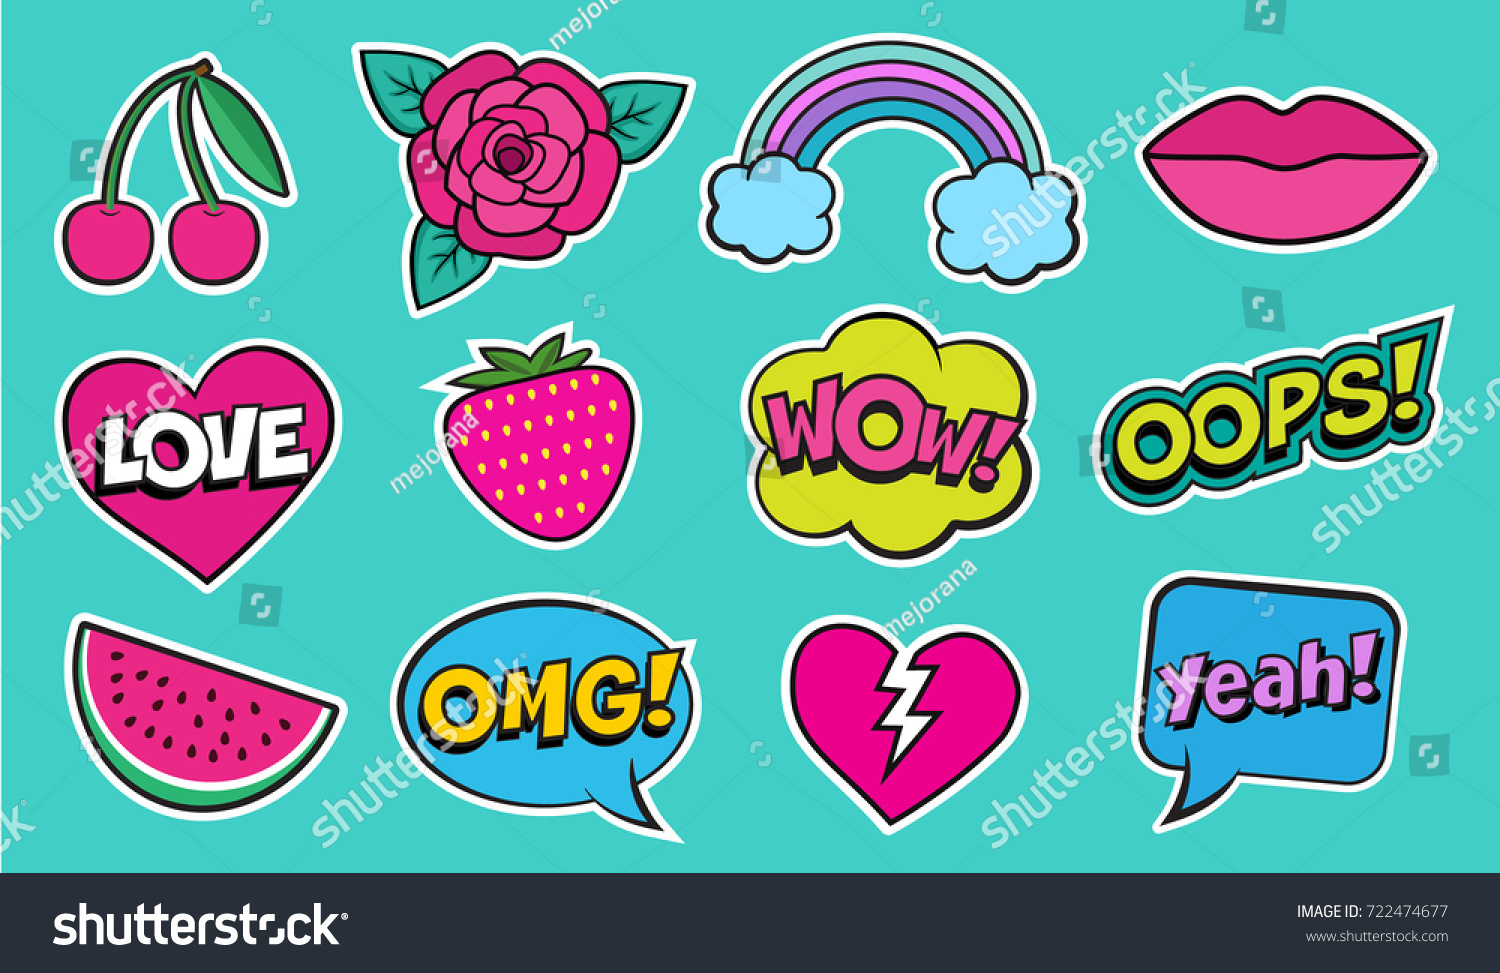 Cool modern colorful patch set on green background. Fashion stickers of cherry, strawberry, watermelon, lips, rose flower, rainbow, hearts, retro comic bubbles, stars . Cartoon 80s-90s pop art style #722474677